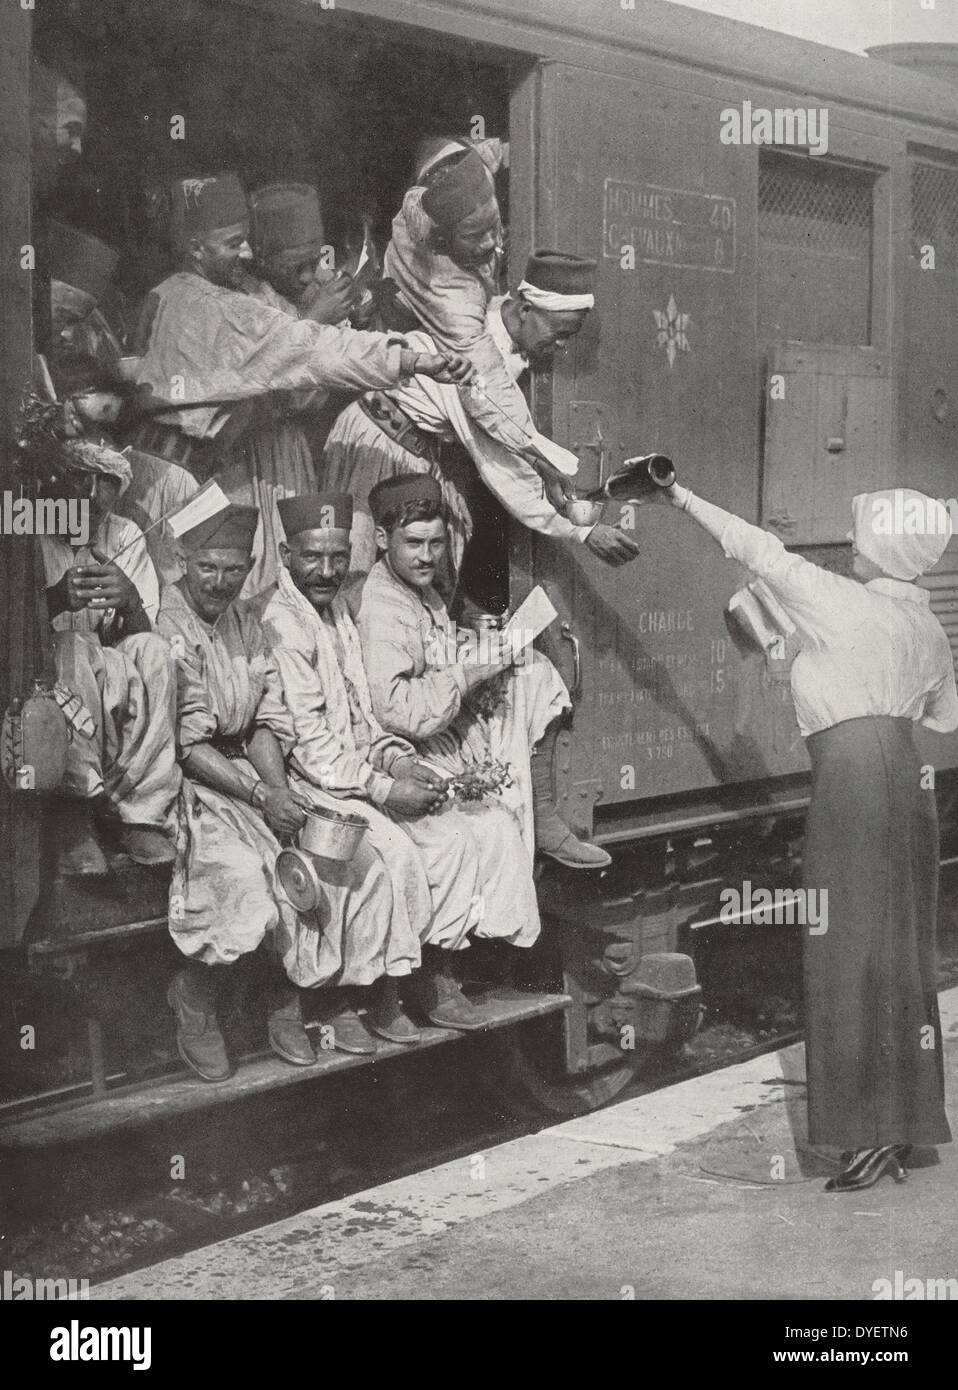 A troop train stopped at a station in Algeria, to collect French colonial forces mobilised to support France at the outbreak of World War One, 19140101 Stock Photo